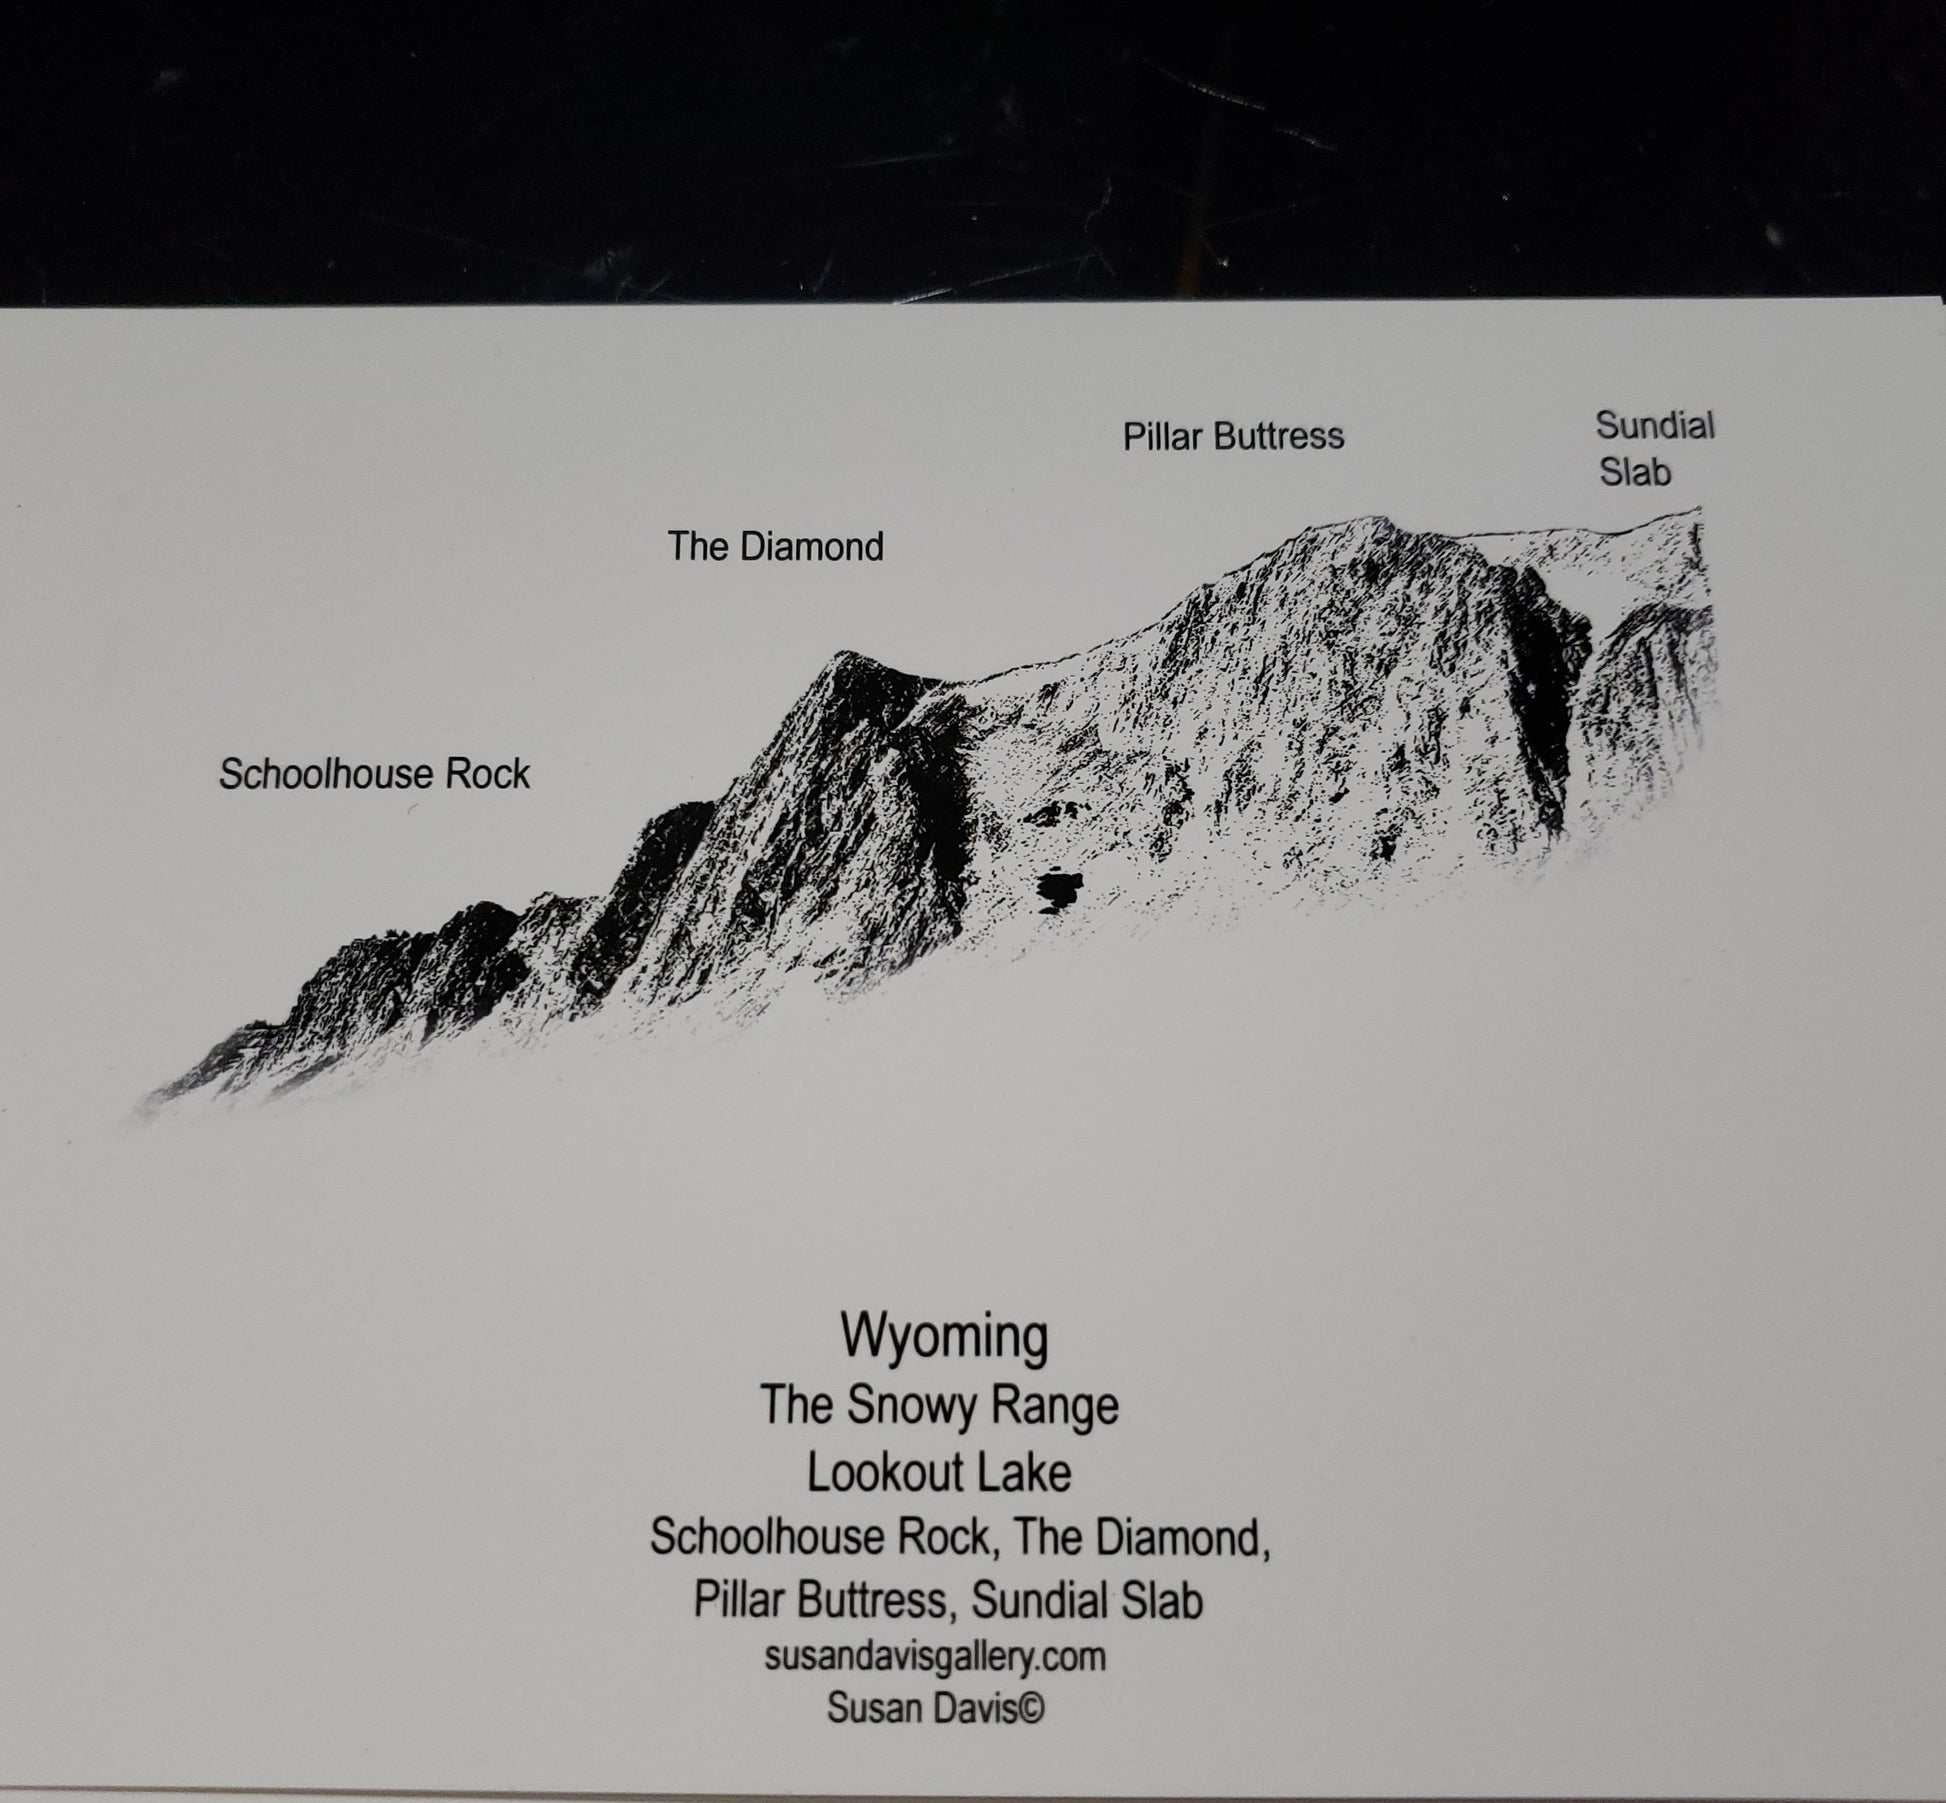 BaCK OF THE PRINT WITH THE MOUNTAIN PEAKS LABELED